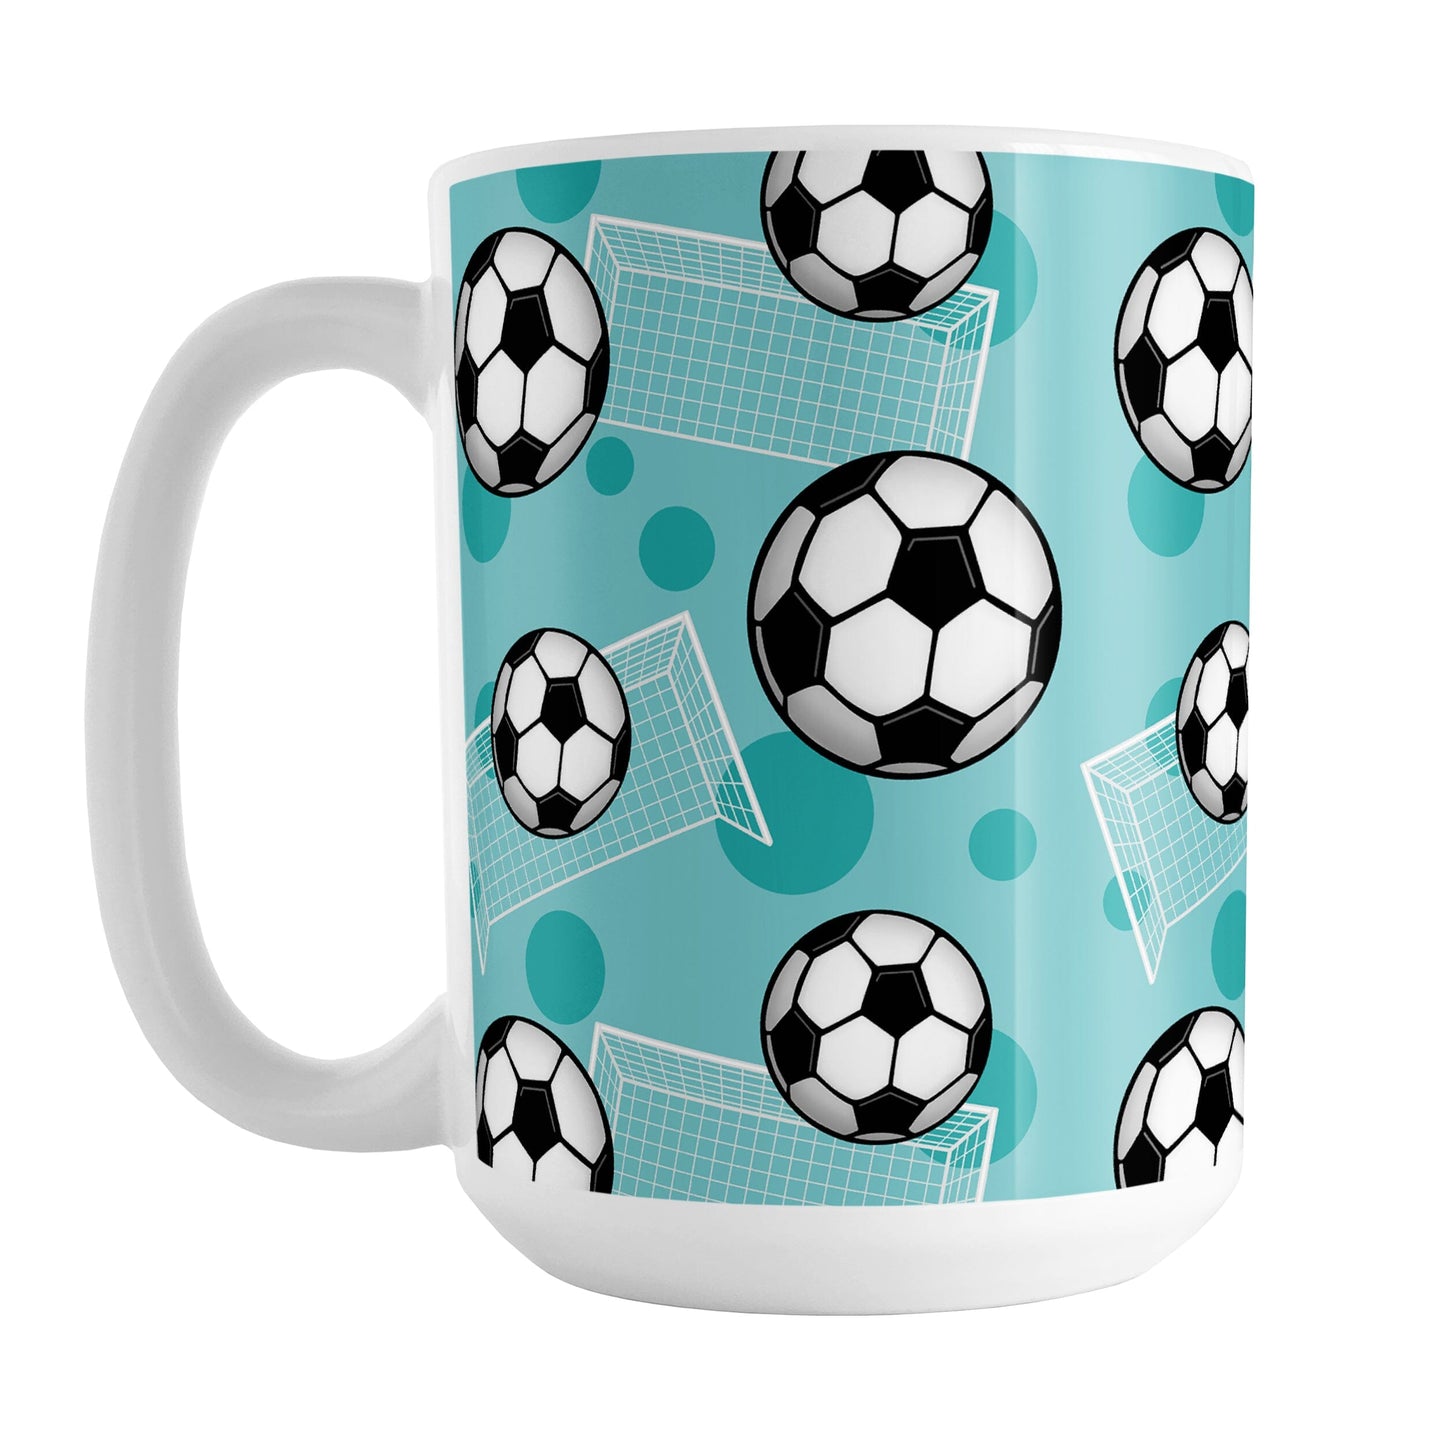 Soccer Ball and Goal Pattern Teal Mug (15oz) at Amy's Coffee Mugs. A ceramic coffee mug designed with a pattern of soccer balls and white soccer goals over a teal background with darker teal circles.